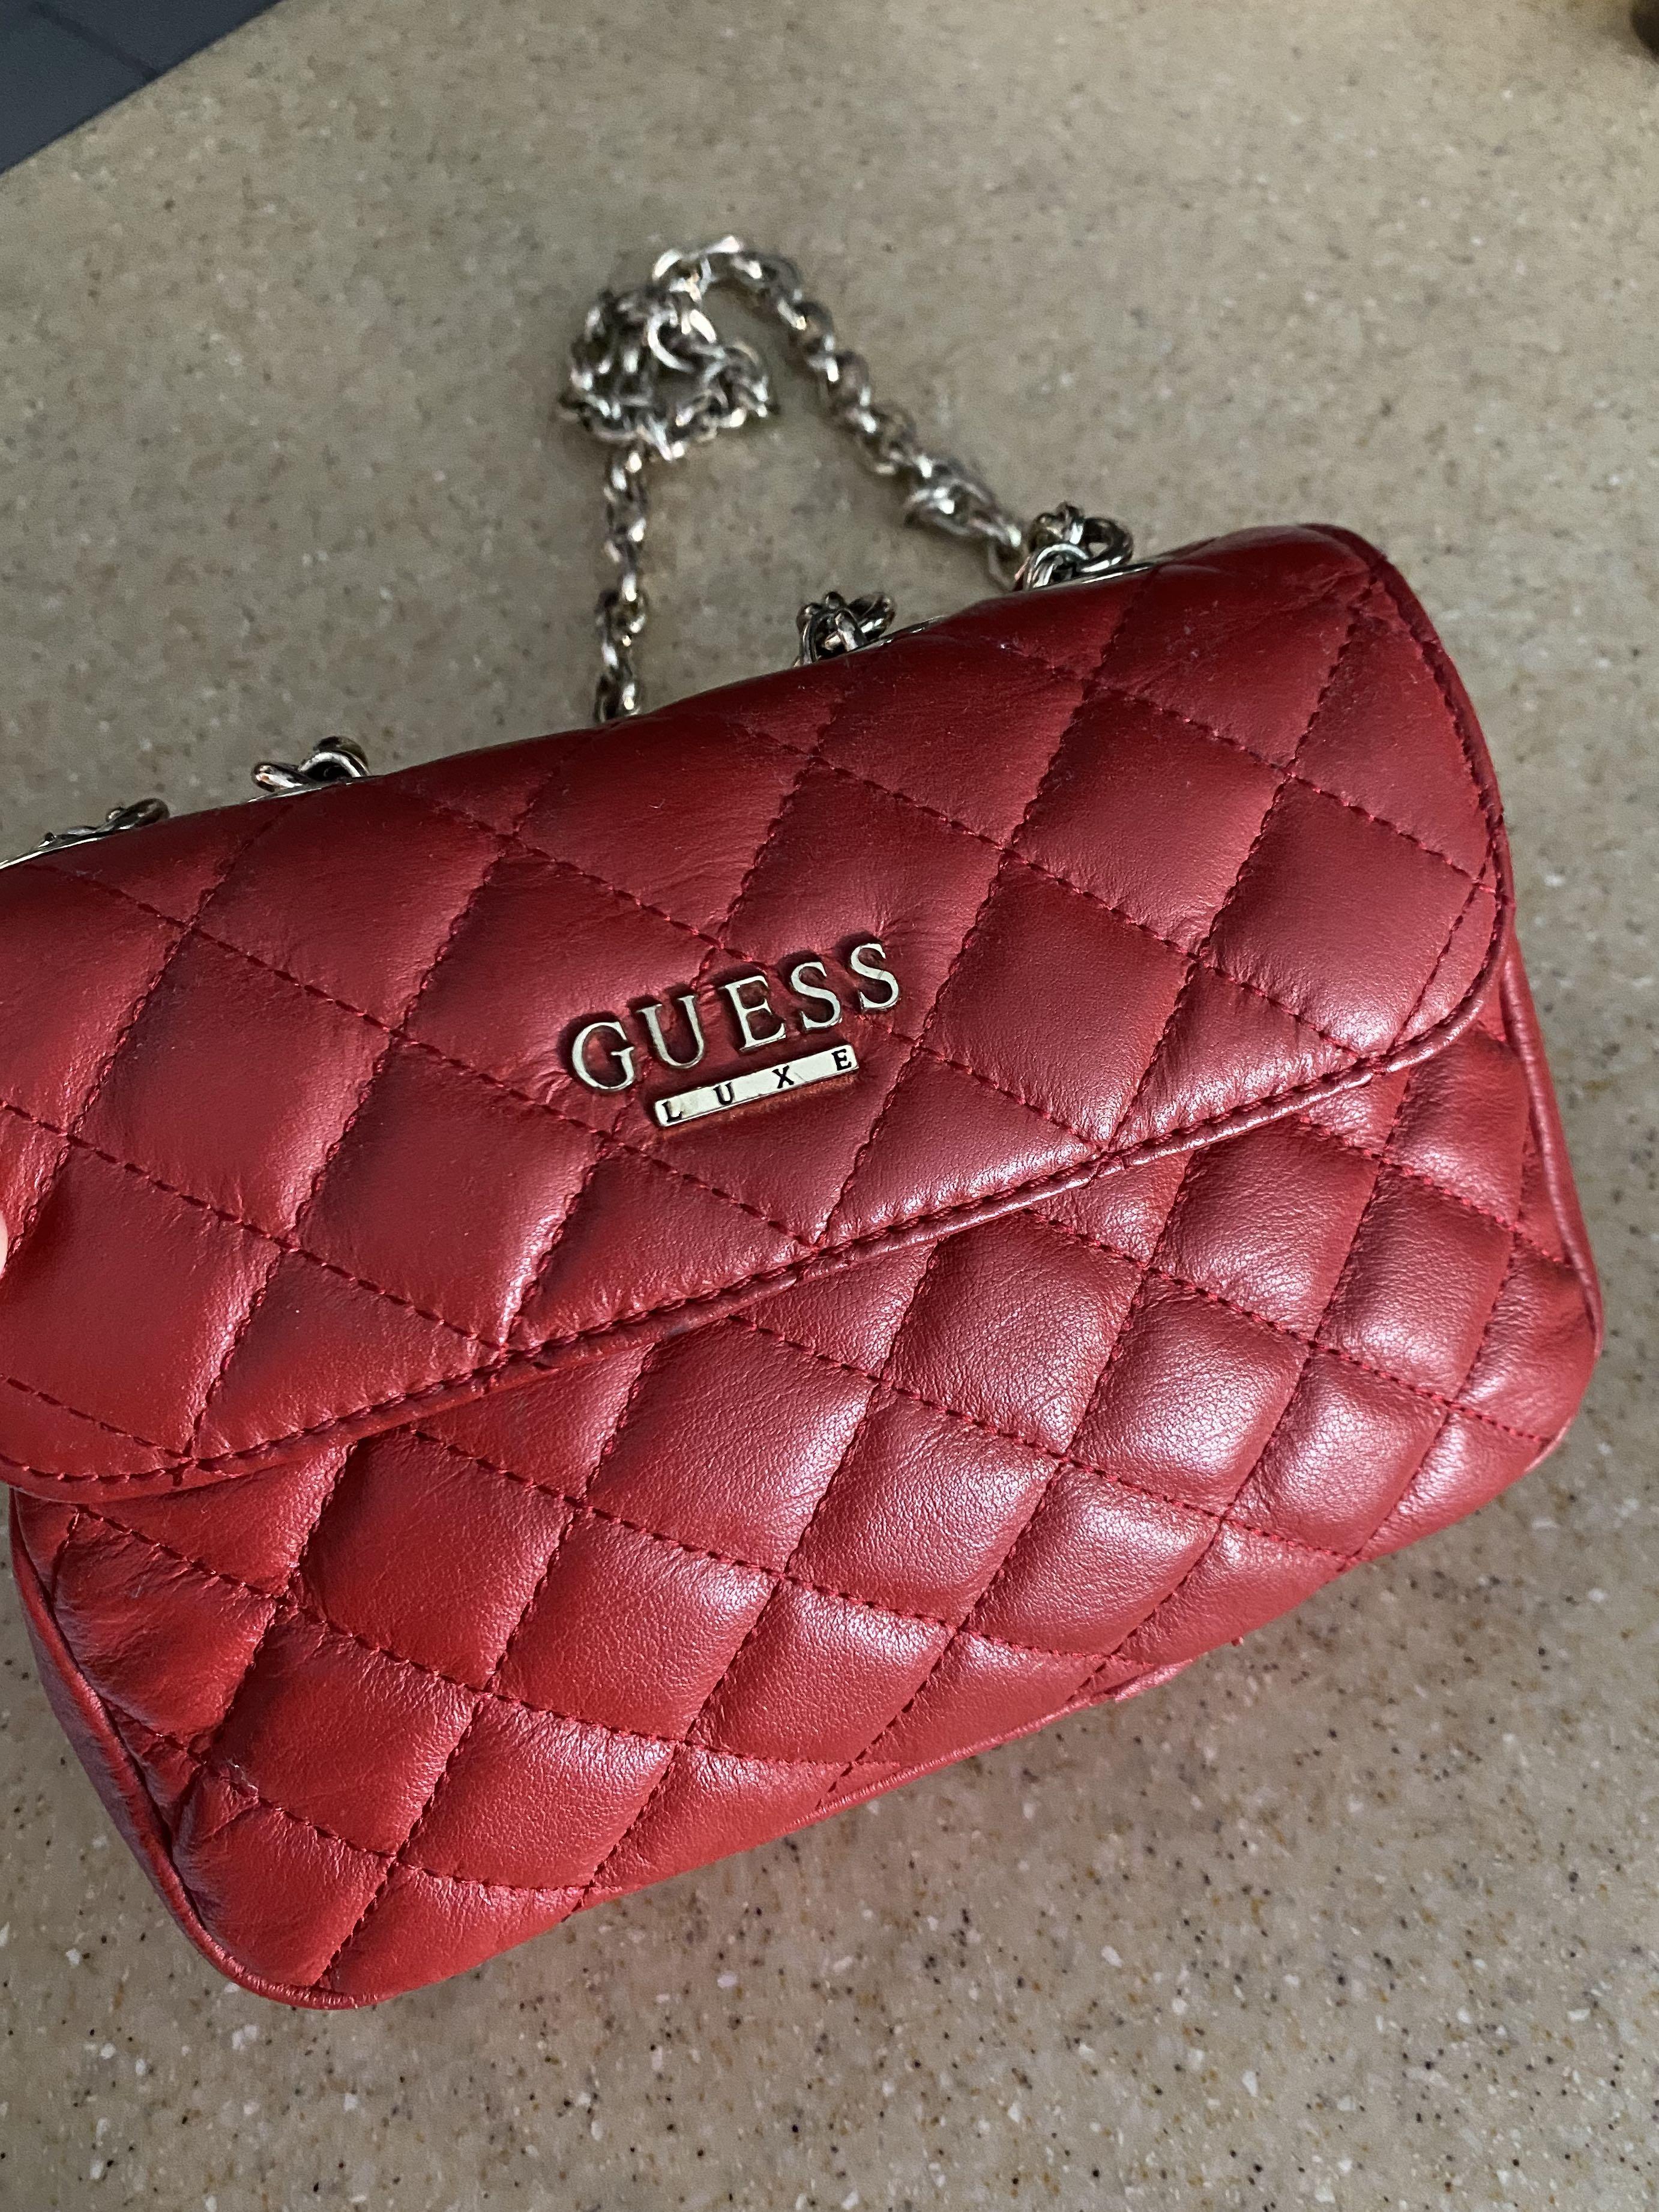 Guess, Bags, Authentic Guess Luxe Genuine Leather Handbag